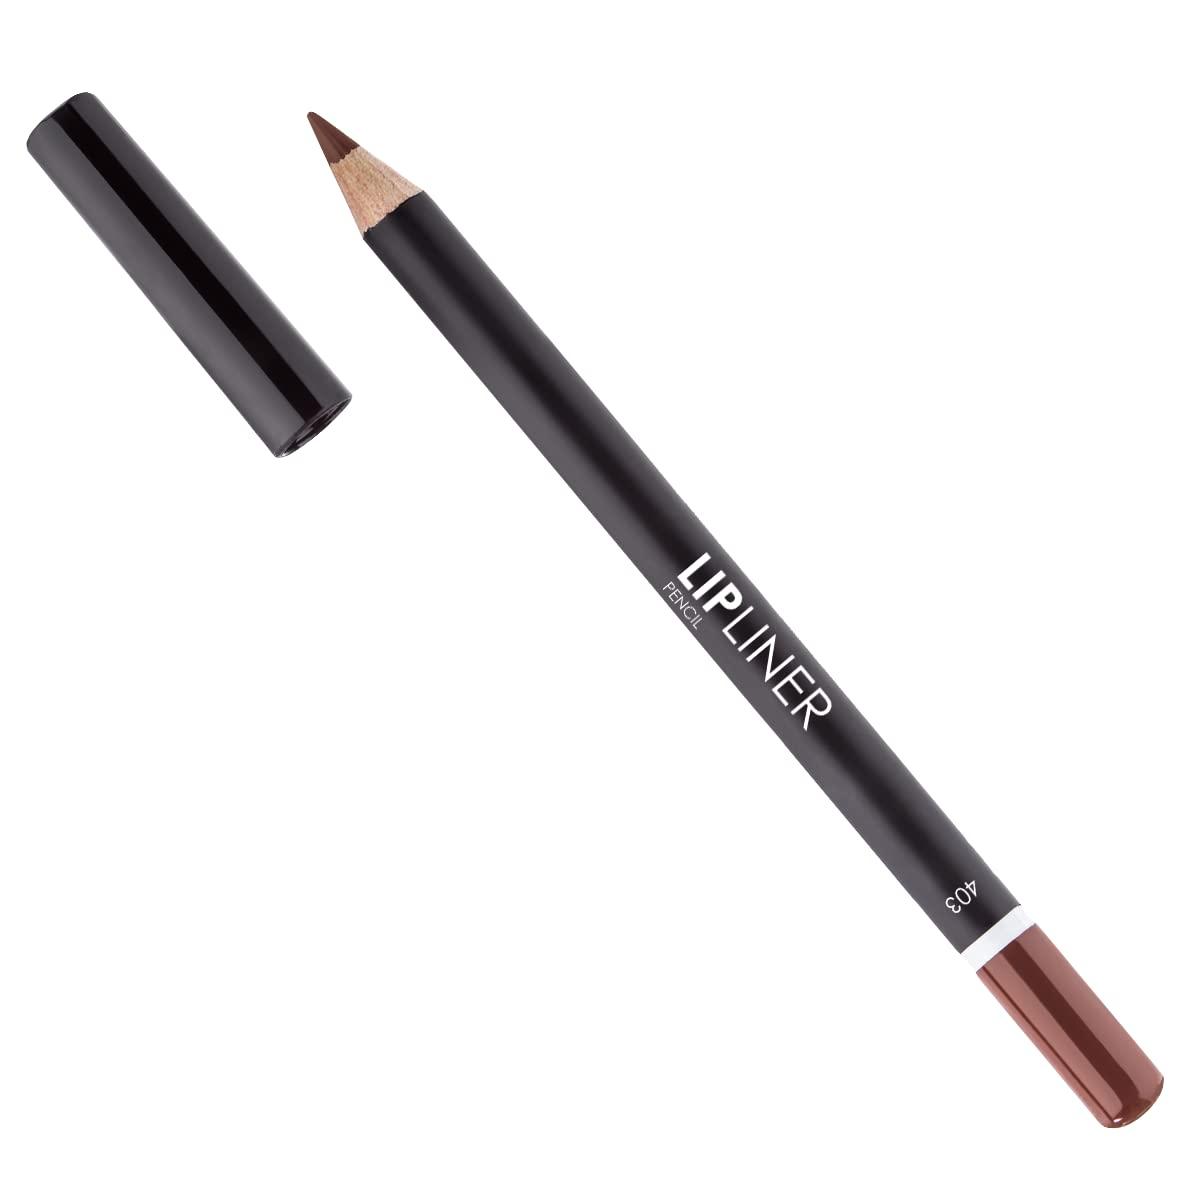 Lamel Vibrant and Long-Lasting Lip Pencils - Compact and Convenient Design  in a Range of Trendy Shades 403 (1.7g / 0.06oz) beige rose